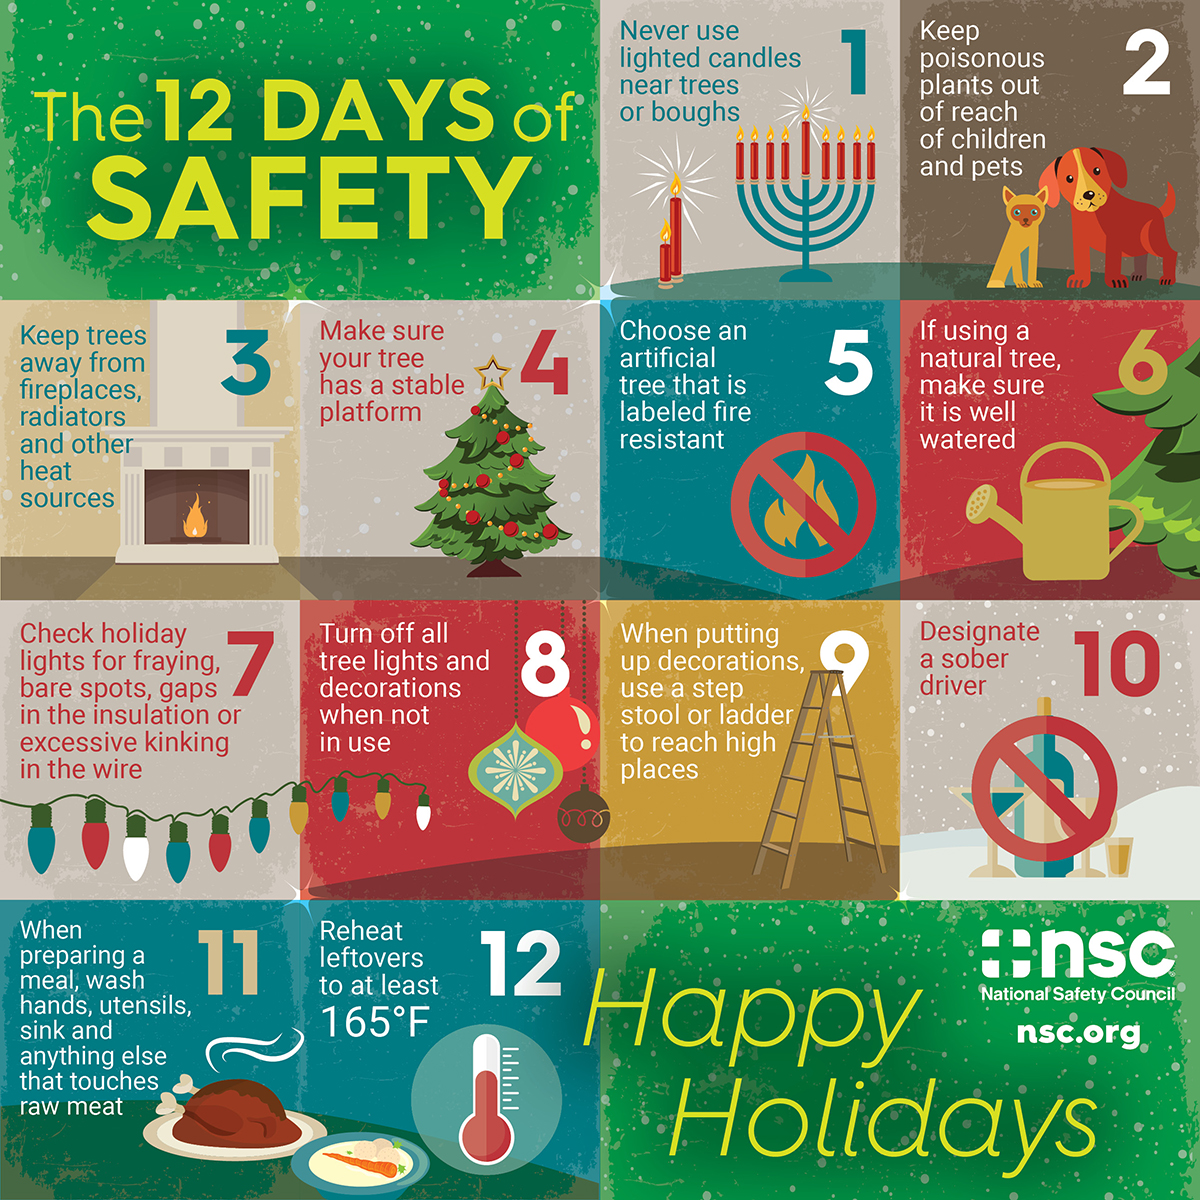 Holiday safety tips from the National Safety Council 20161110